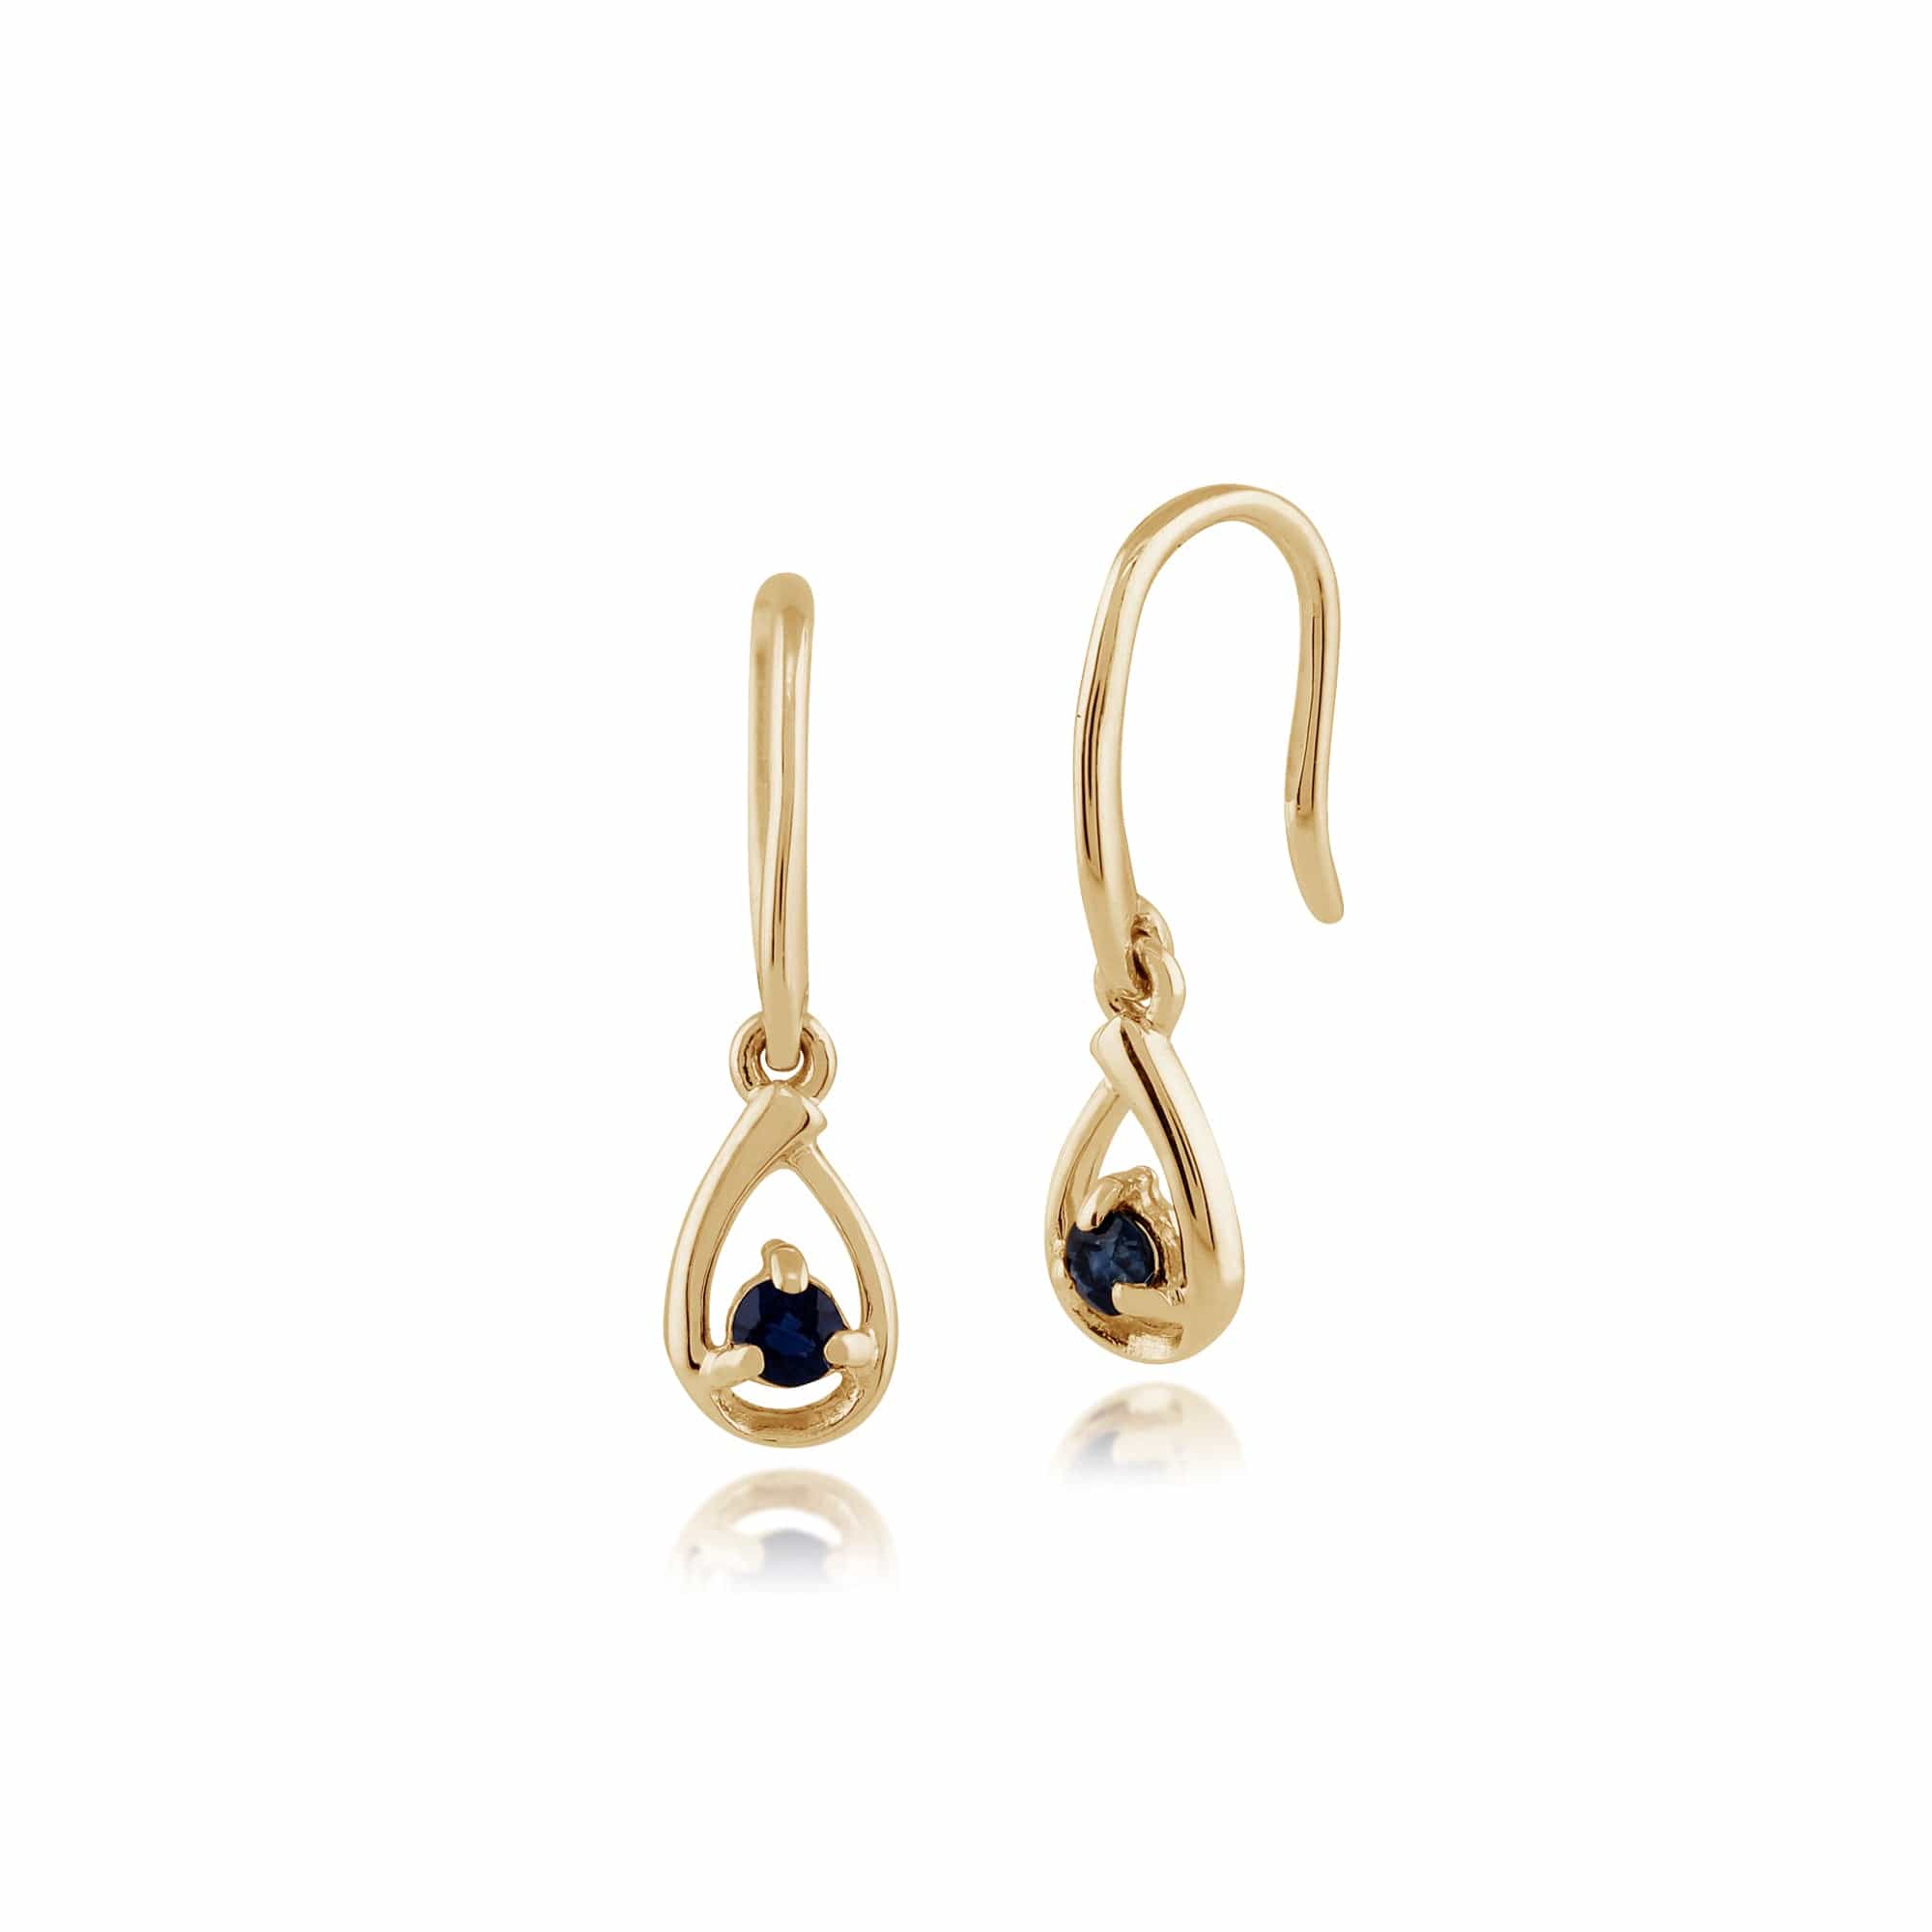 Photos - Earrings Classic Round Sapphire Hook Drop  in 9ct Gold